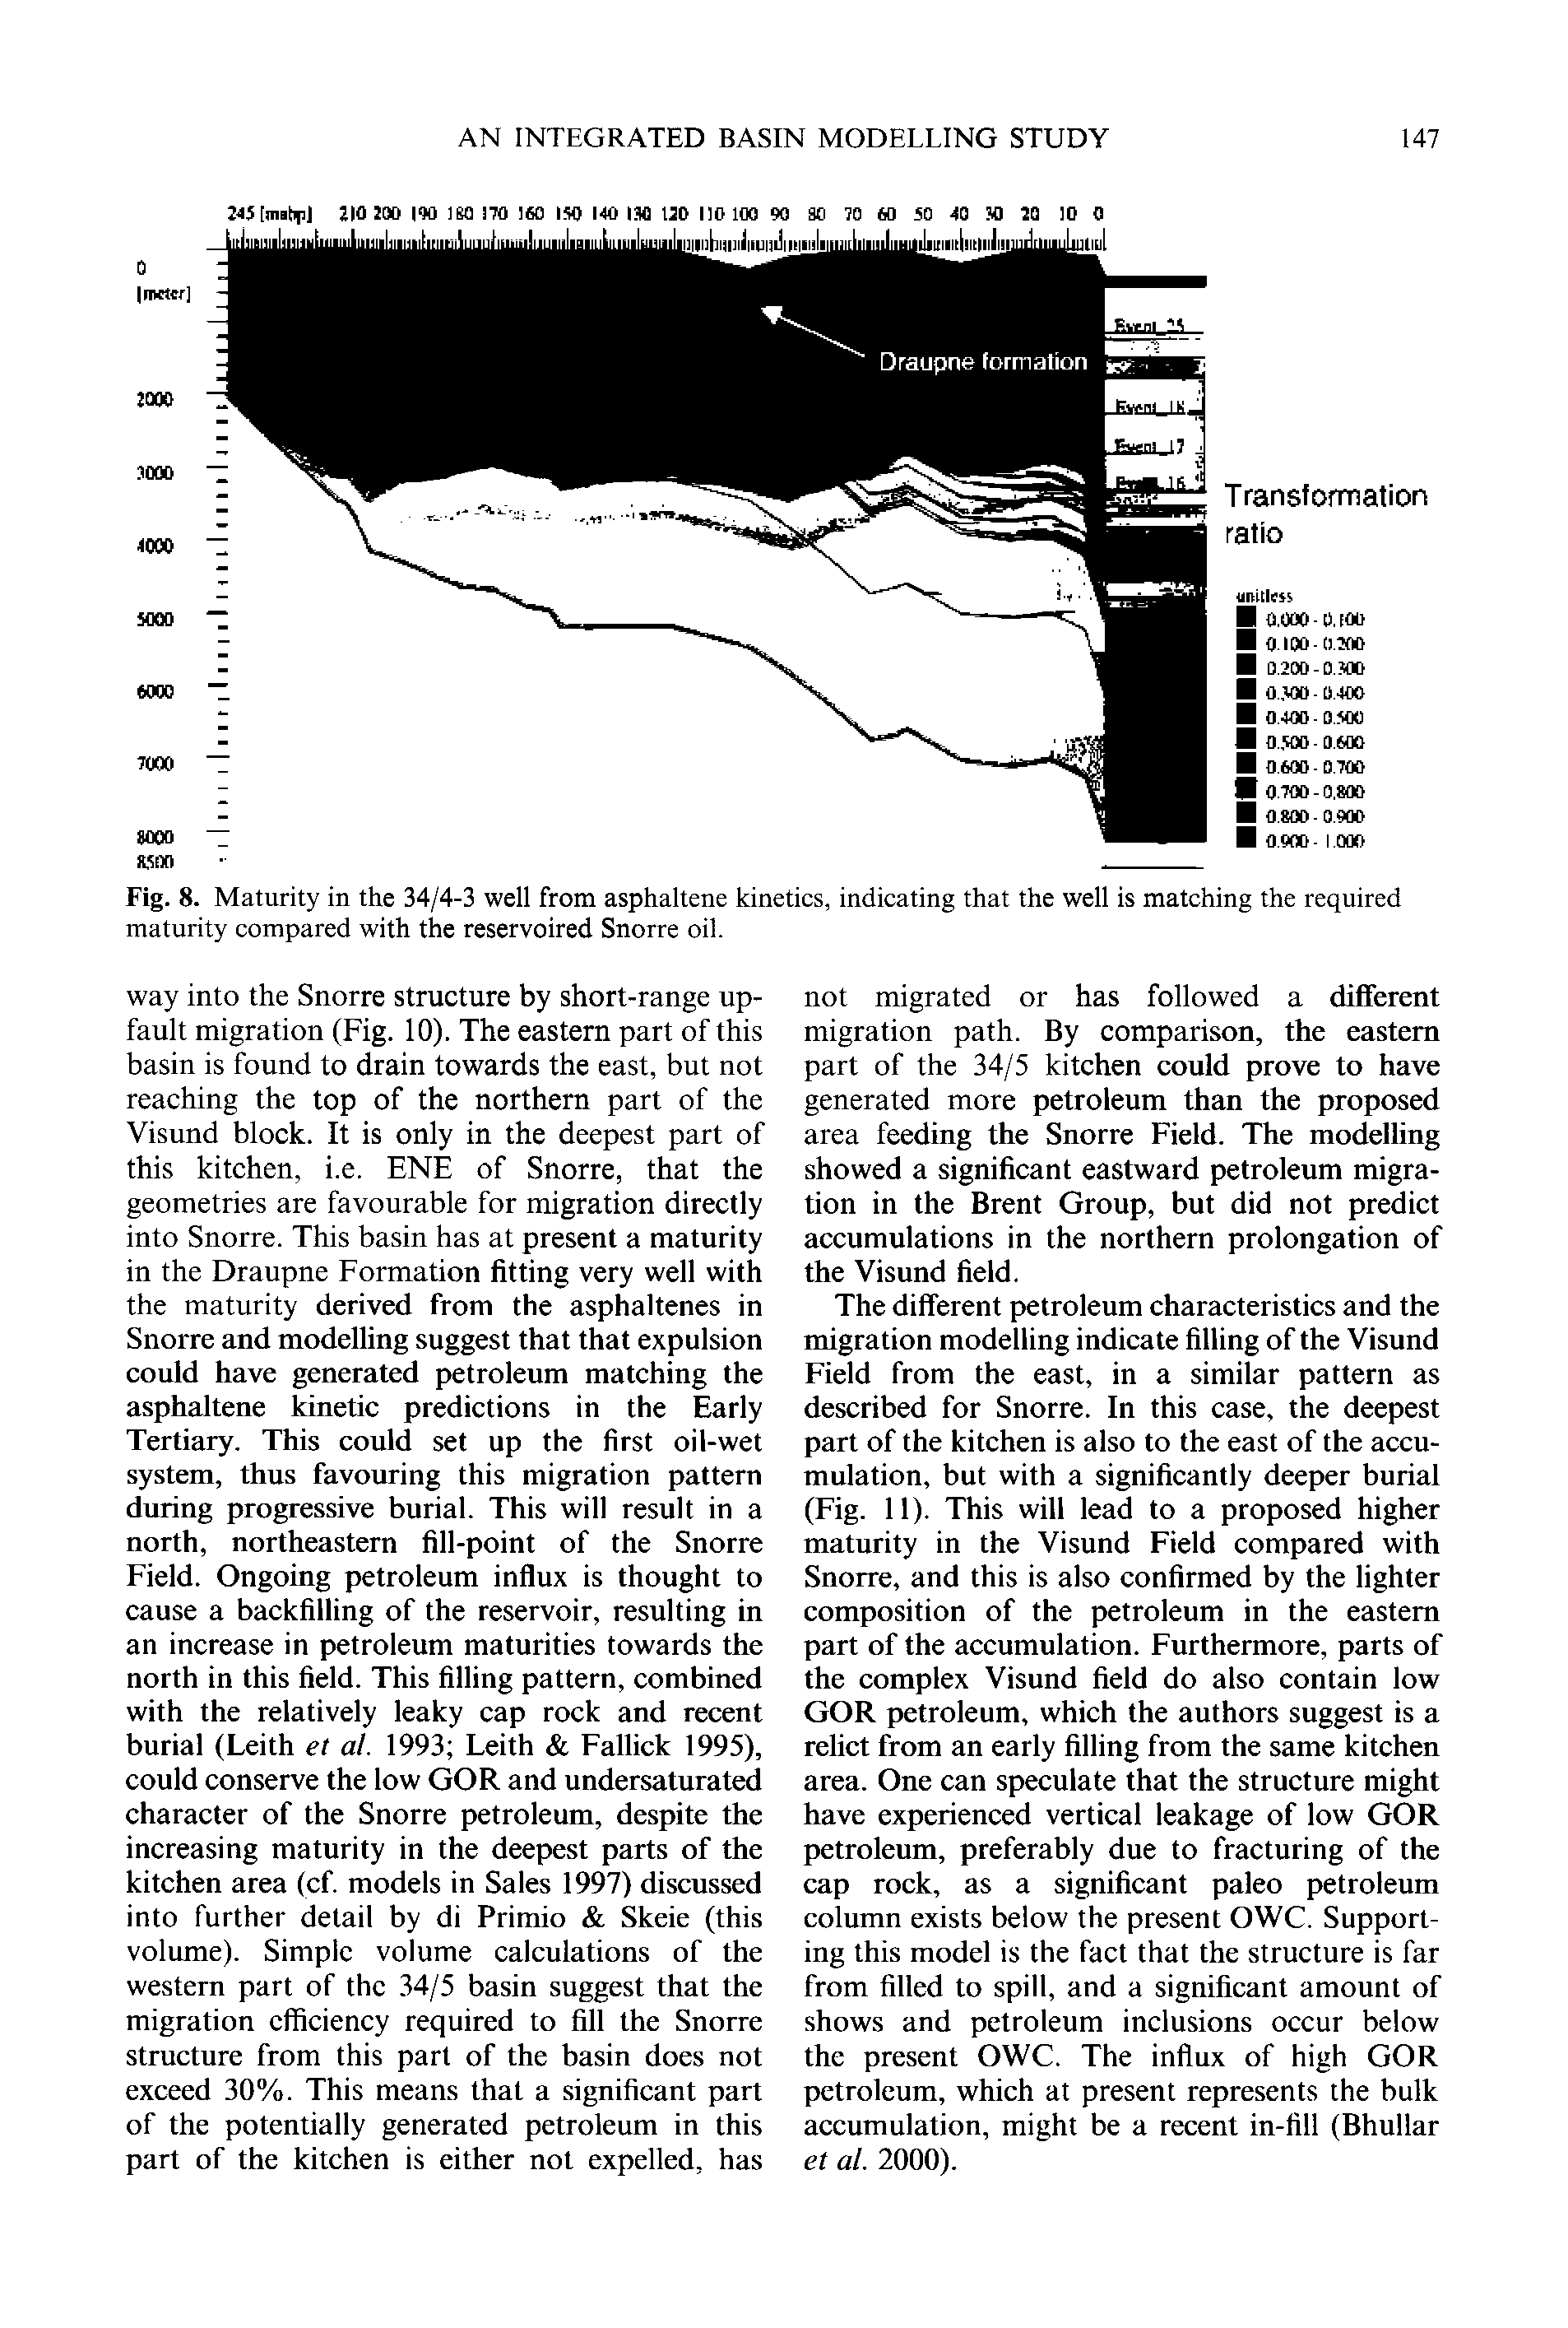 Fig. 8. Maturity in the 34/4-3 well from asphaltene kinetics, indicating that the well is matching the required maturity compared with the reservoired Snorre oil.